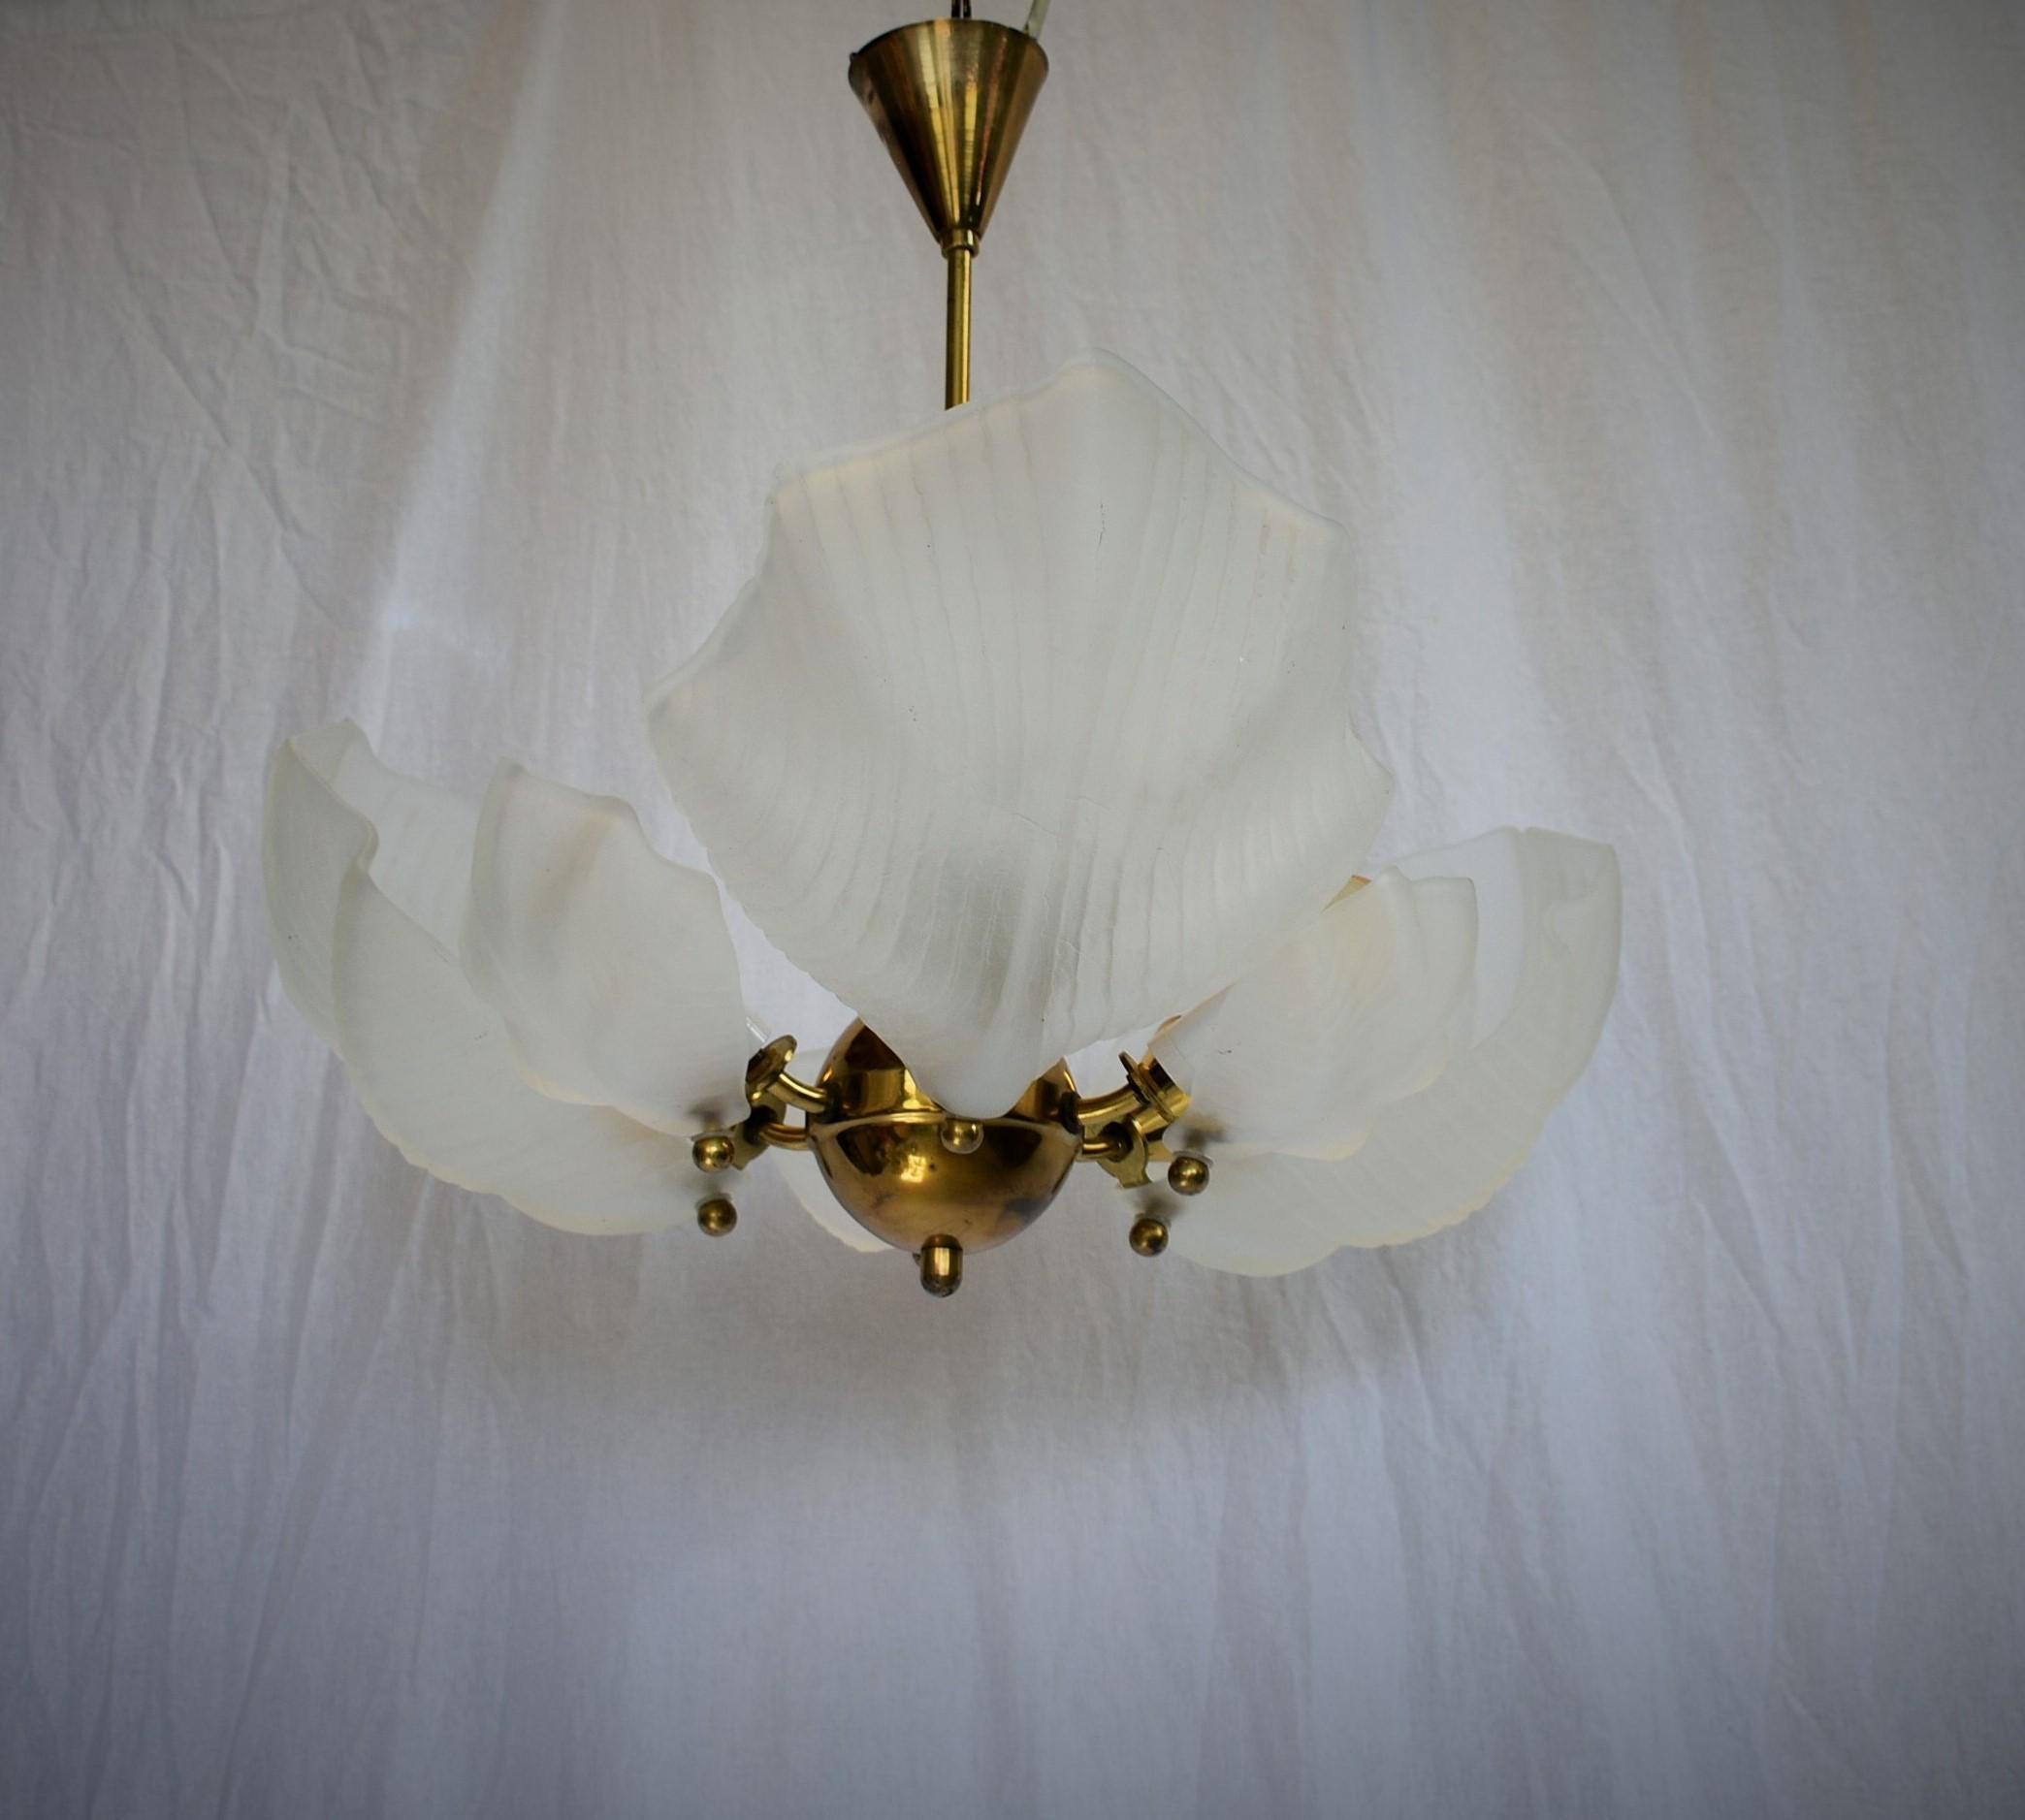 6 flaming chandelier in a good condition.
Made in Czechoslovakia by Kamenicky Senov in 1960s.